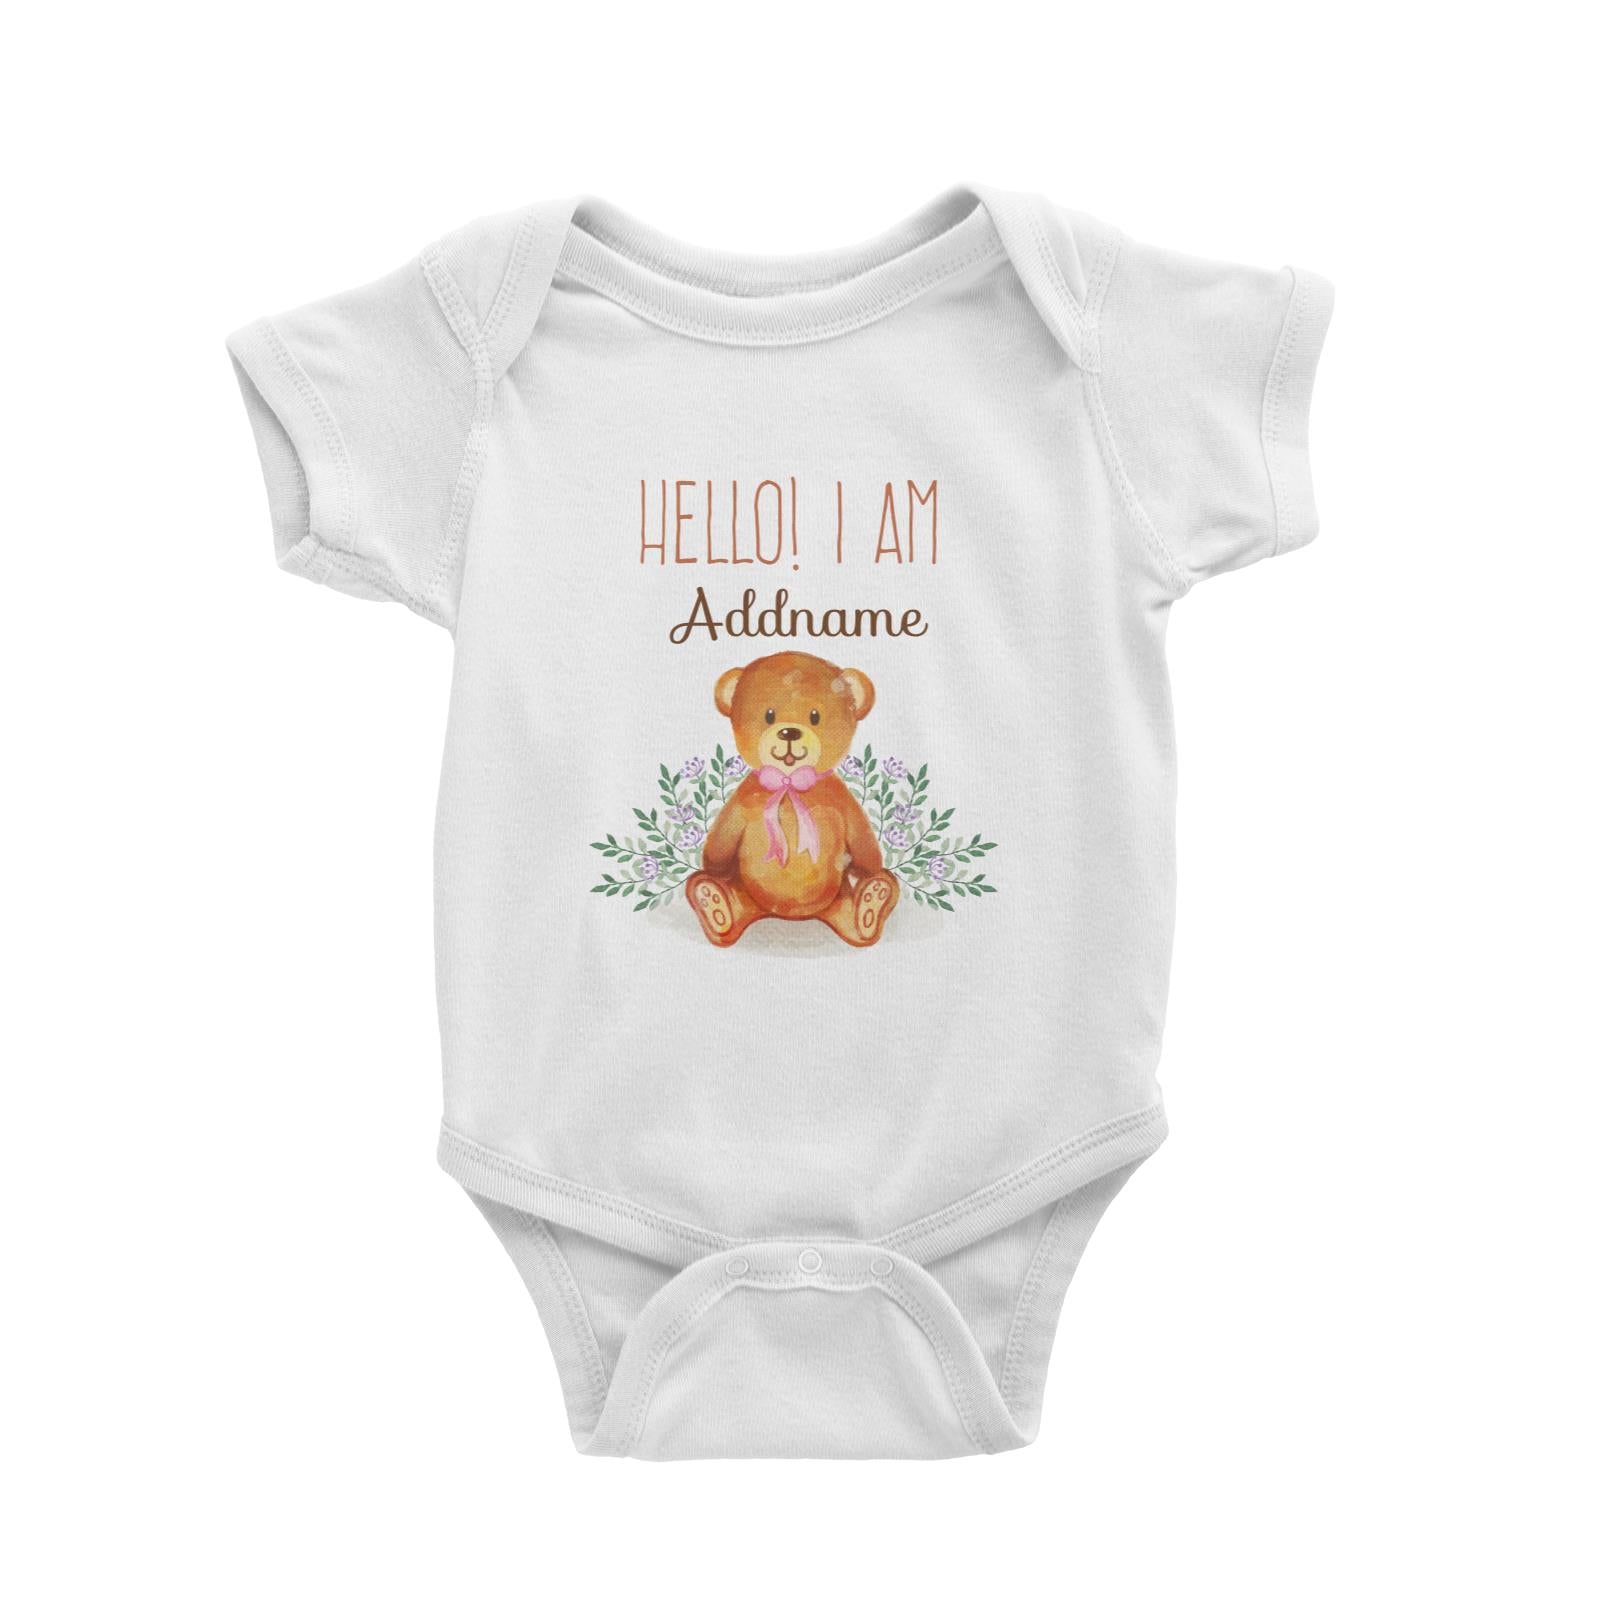 Hello I am Addname with Cuddly Bear Baby Romper Personalizable Designs Basic Newborn